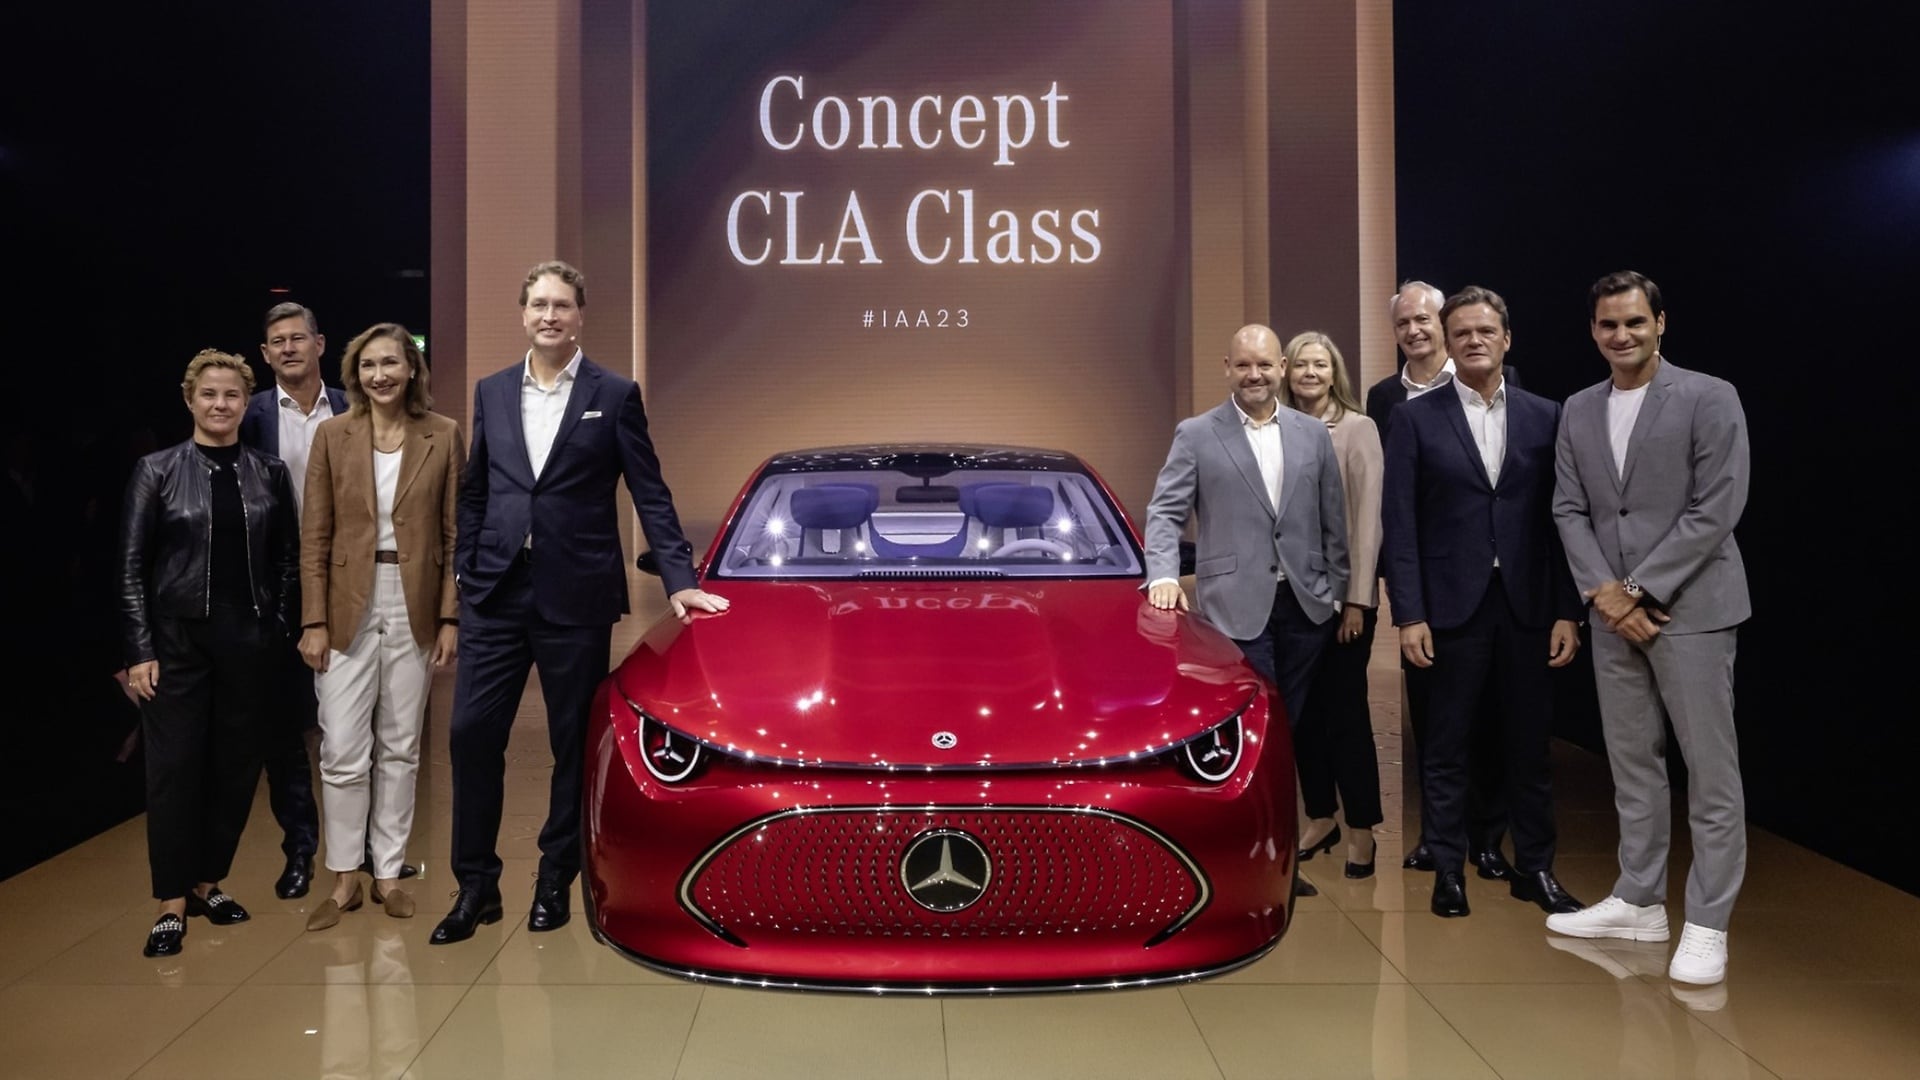 The Board of Management of Mercedes-Benz AG and Roger Federer with the Concept CLA Class.